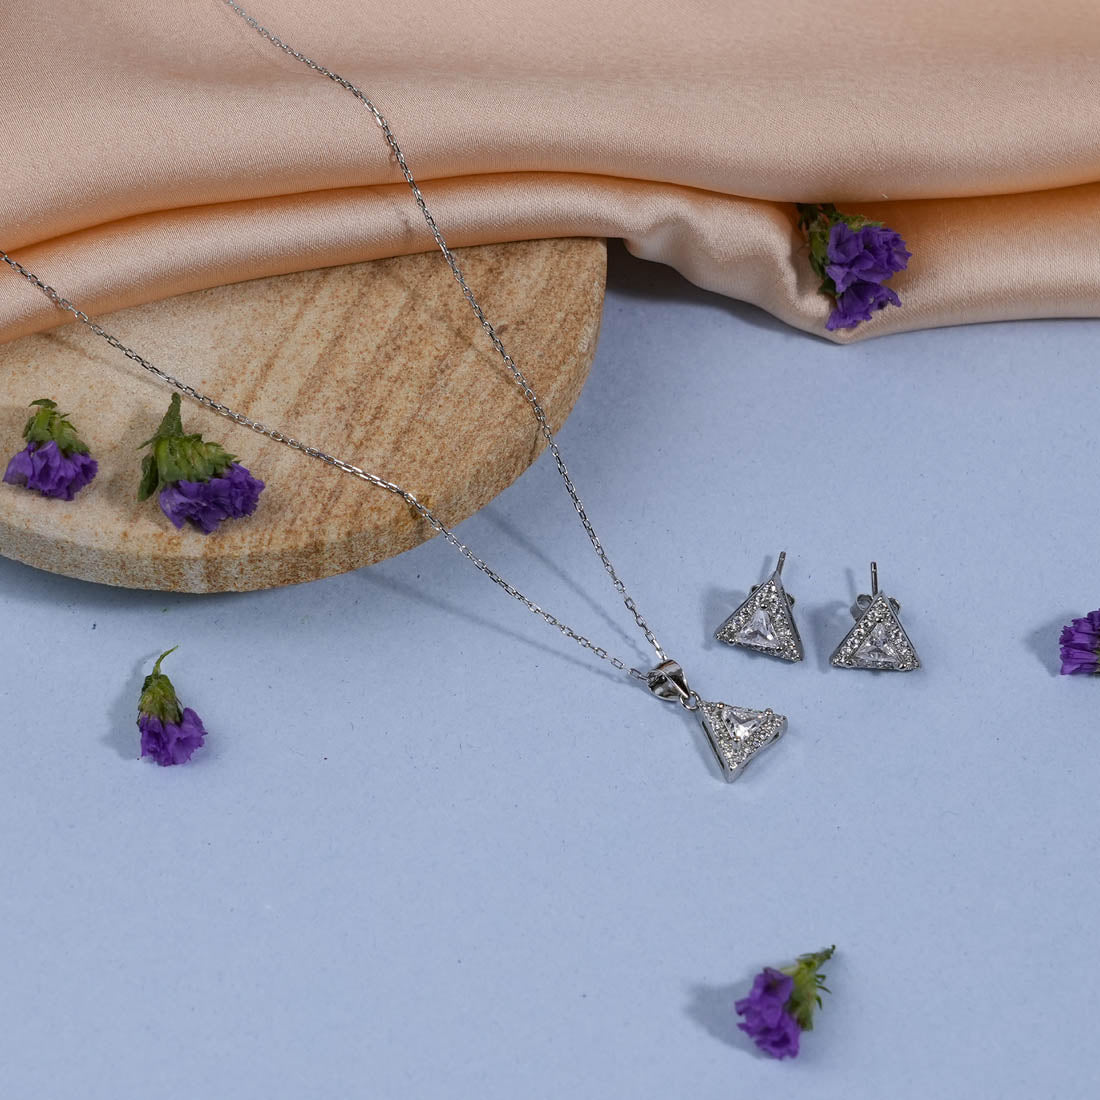 Silver Set Chain Triangular Pendant and Earrings with Stones for Women